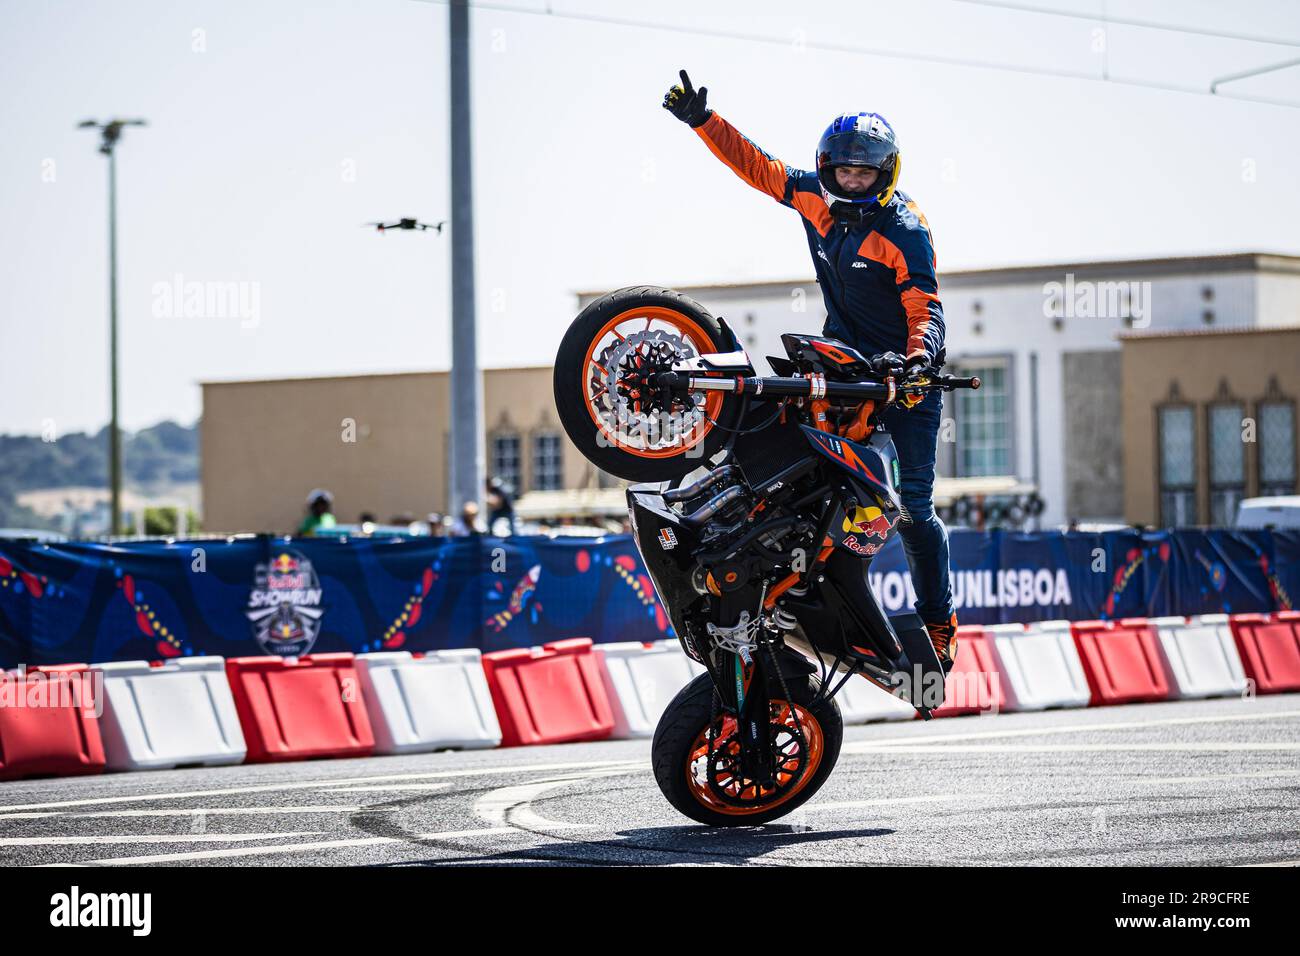 Lisbon, Portugal. 25th June, 2023. Lithuanian rider Aras Gibieza performs motorcycle stunts during the first edition of Red Bull Showrun in Lisbon. (Photo by Henrique Casinhas/SOPA Images/Sipa USA) Credit: Sipa USA/Alamy Live News Stock Photo